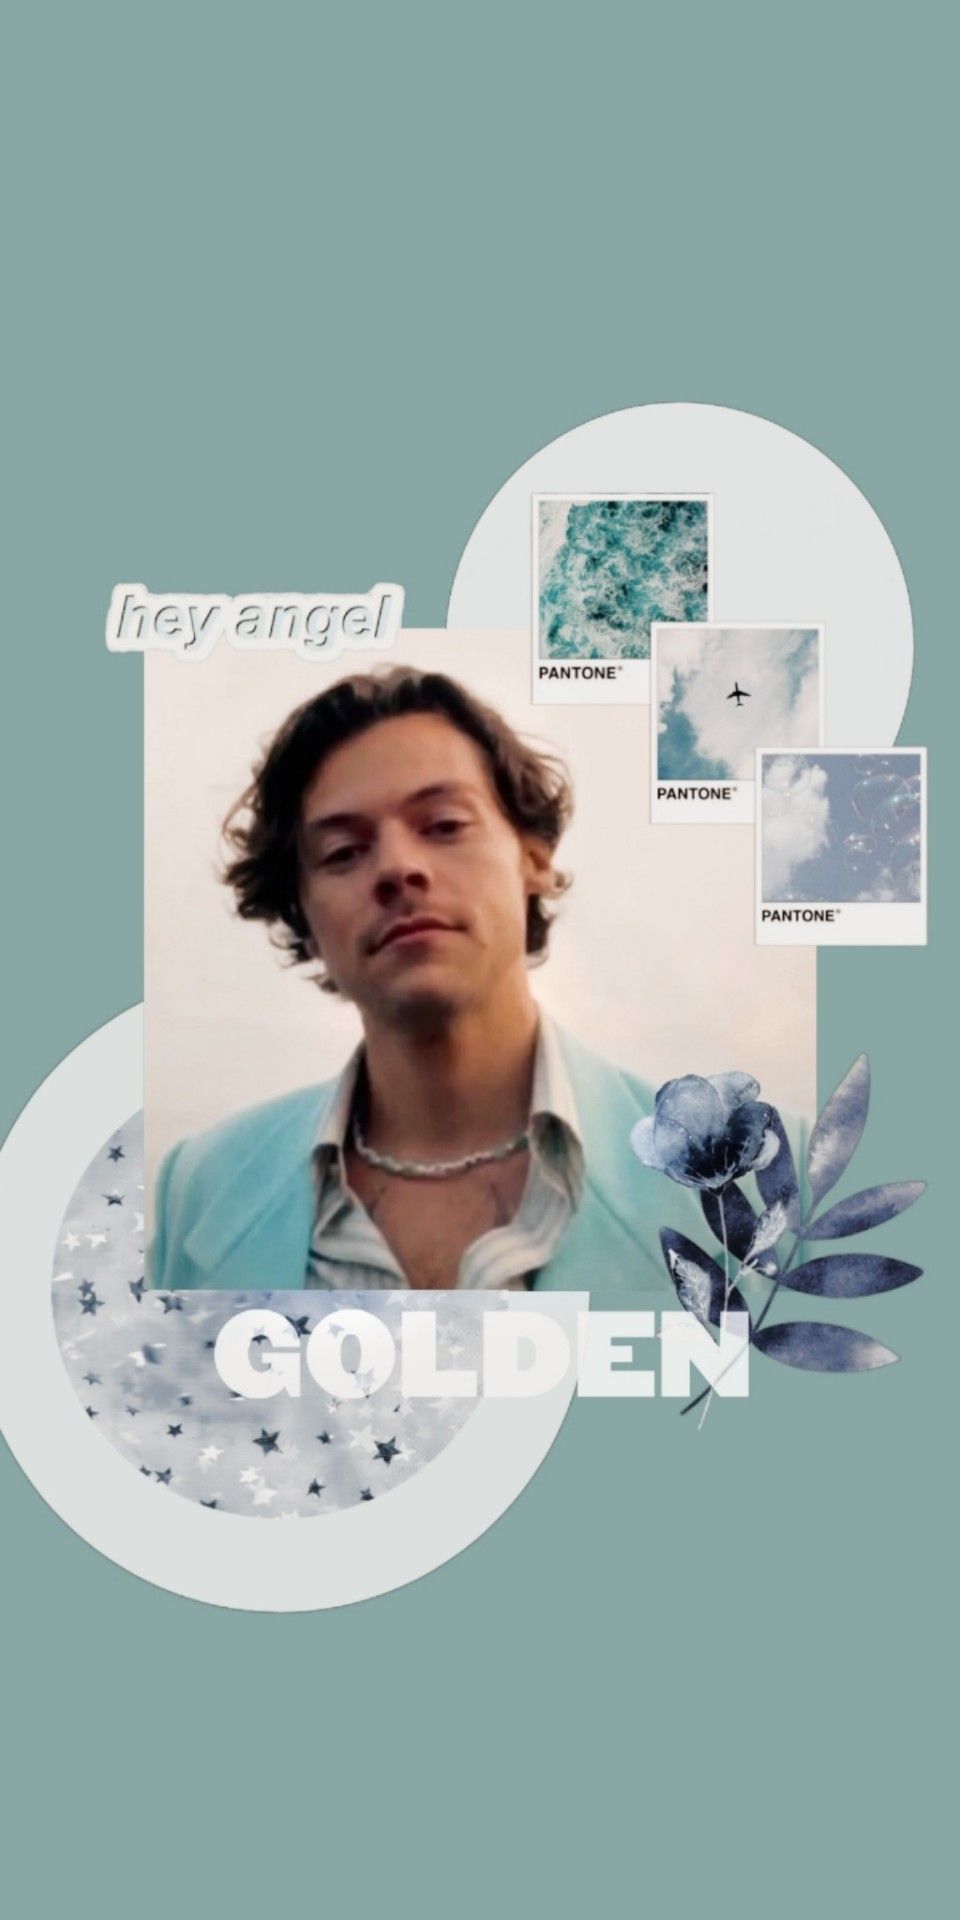 Harry Styles wallpaper I made! If you use it, please give me credit! - Harry Styles